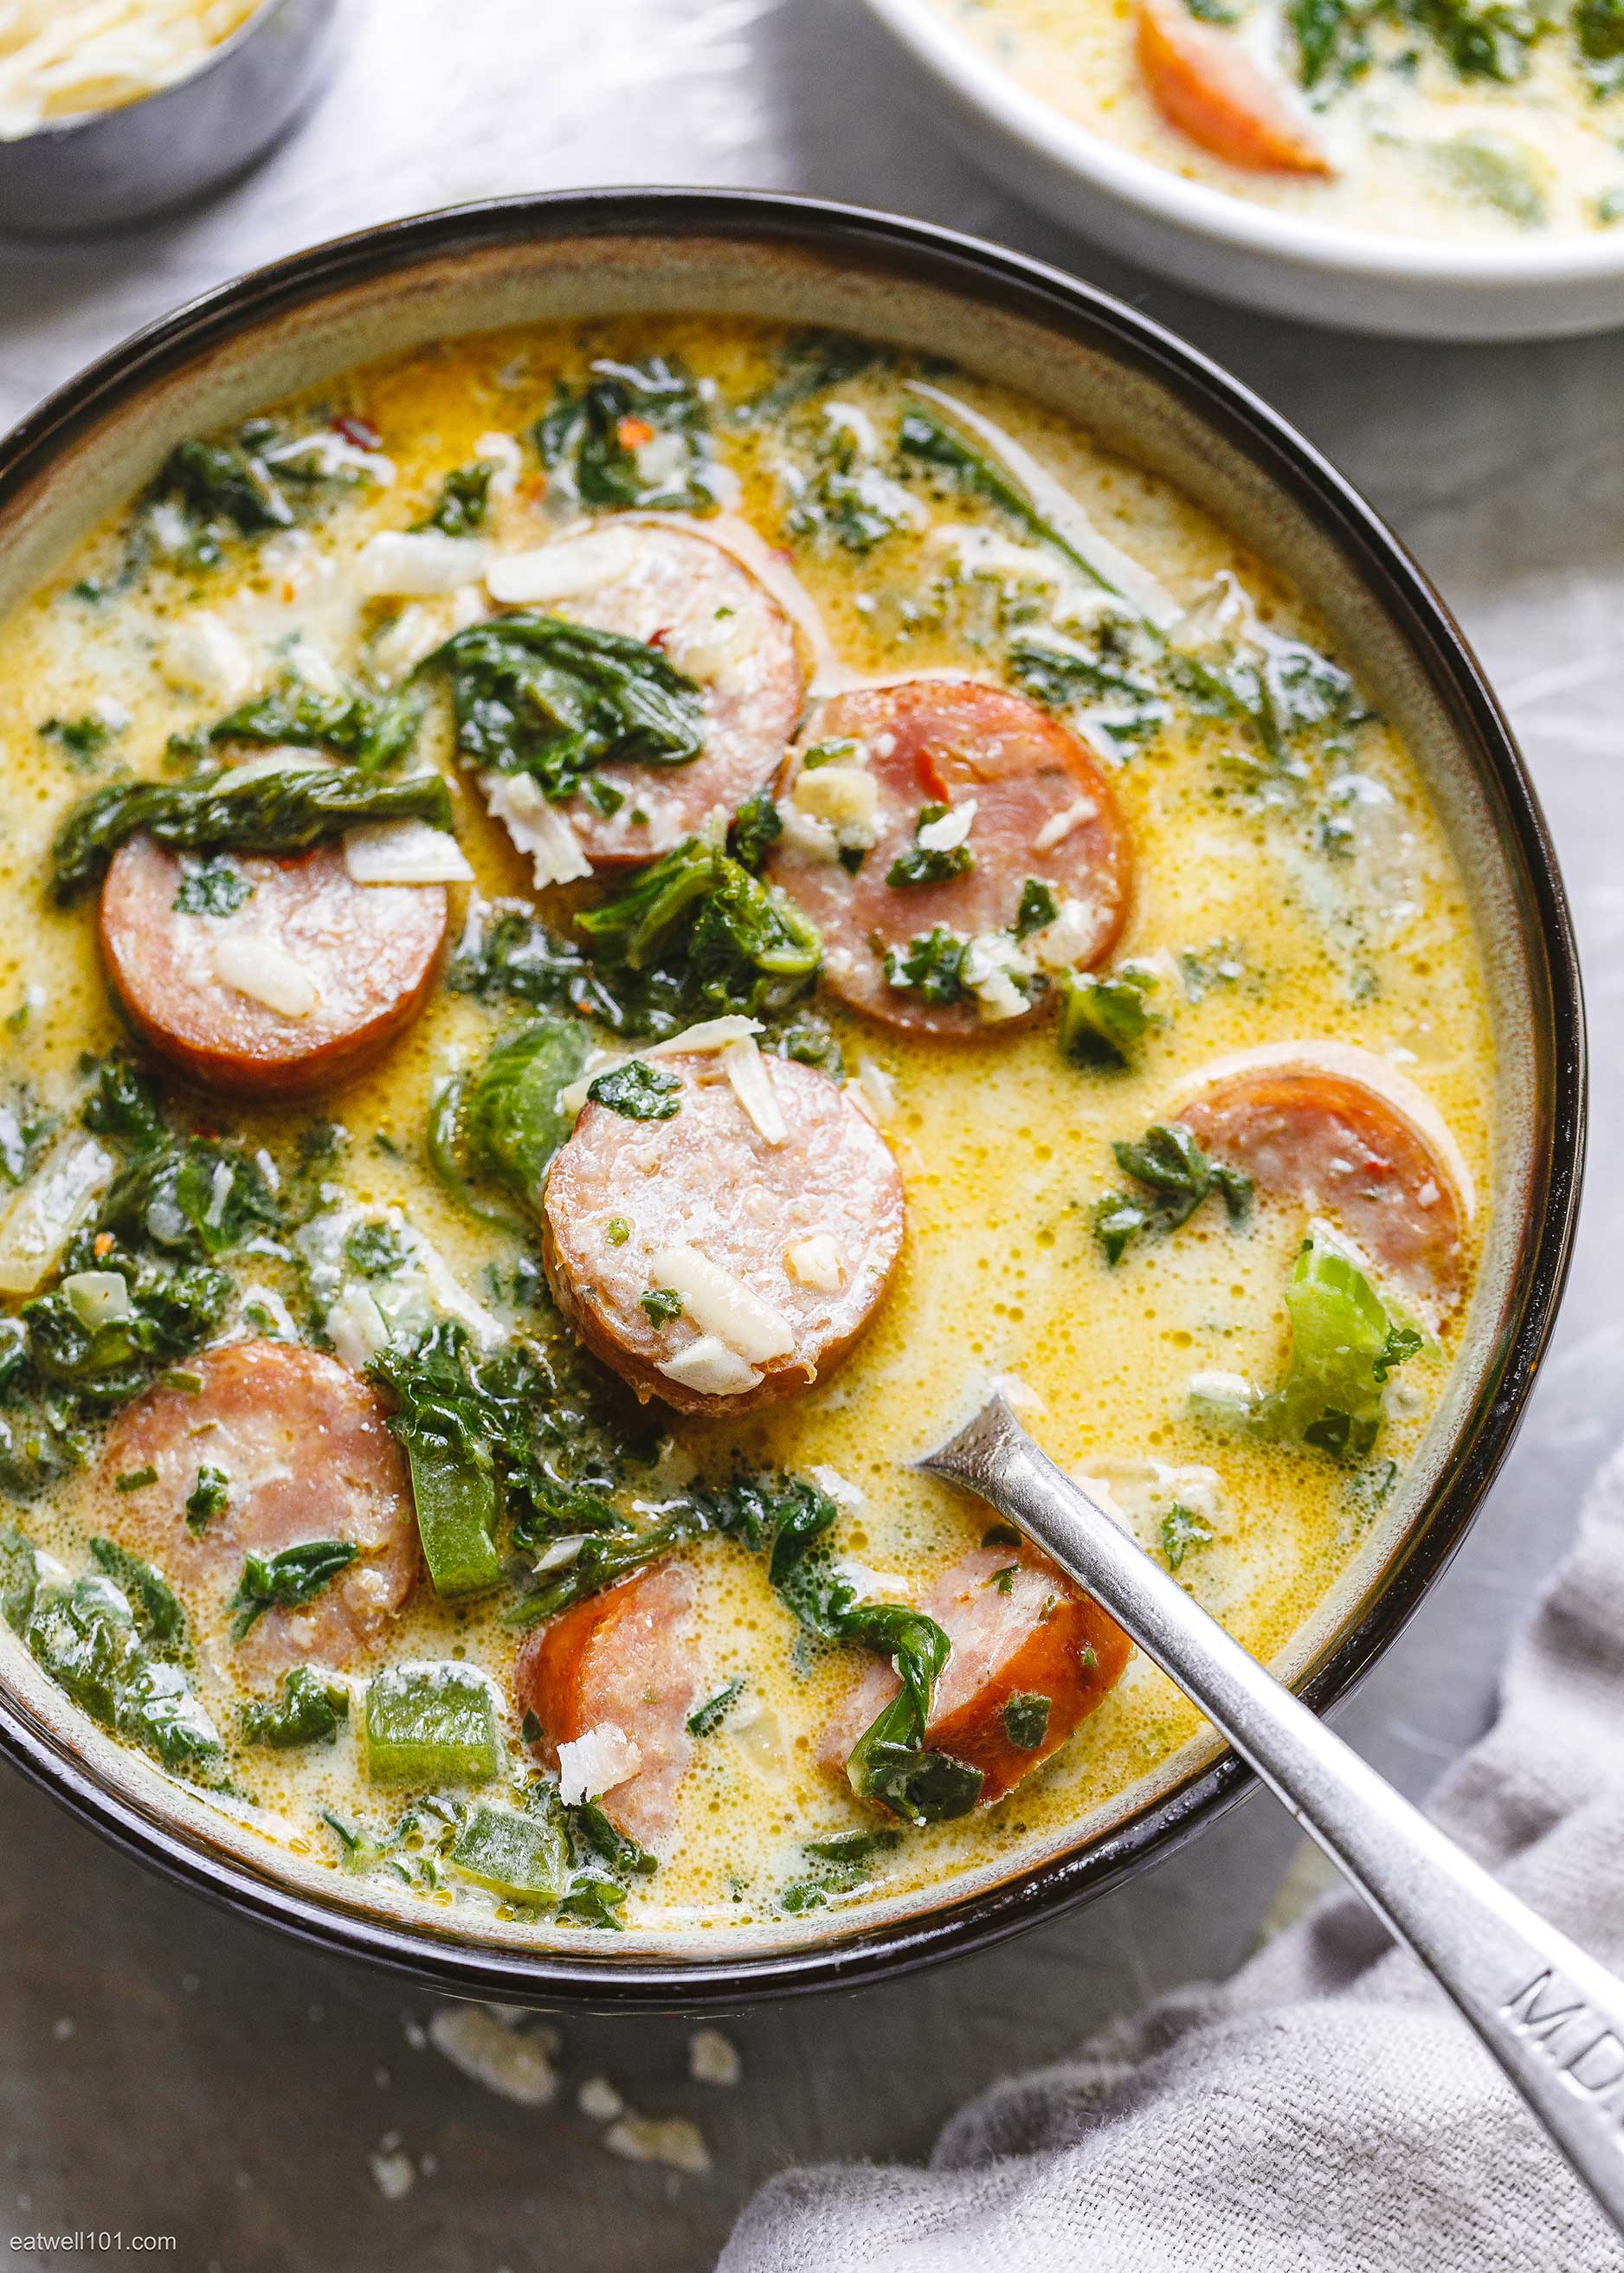 Creamy Sausage Soup Recipe With Green Vegetables – Green Sausage Soup ...